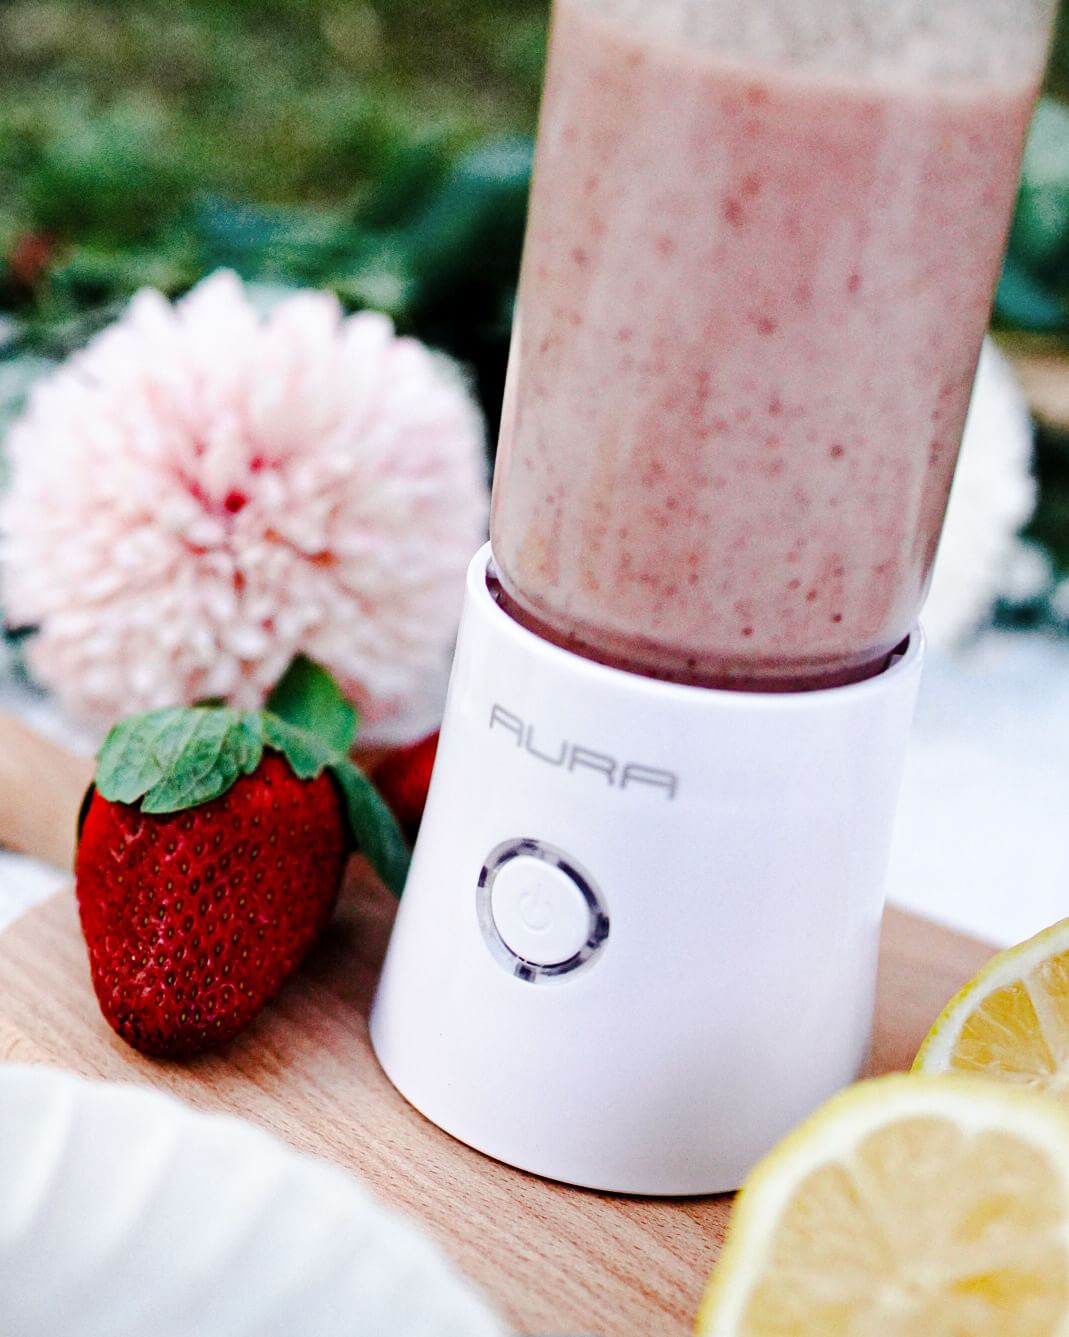 Aura Blender Review: Smoothie-Making with my Portable Mini Blender